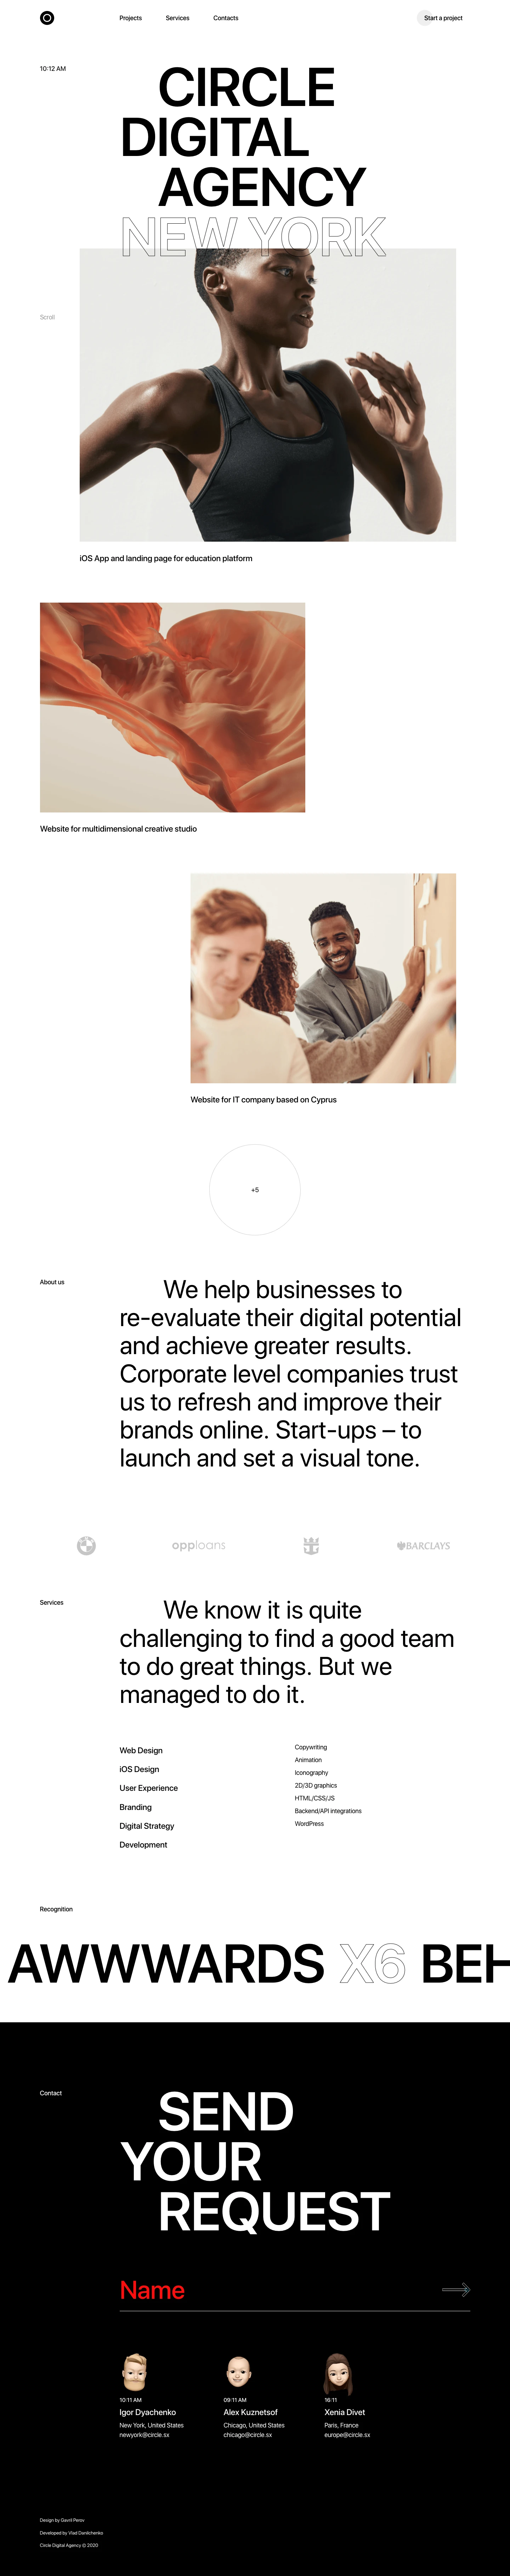 Circle Landing Page Example: Digital Agency in New York City, Chicago & Paris. Clients include Mastercard, Barclays, Adobe, BMW, Ducati etc.